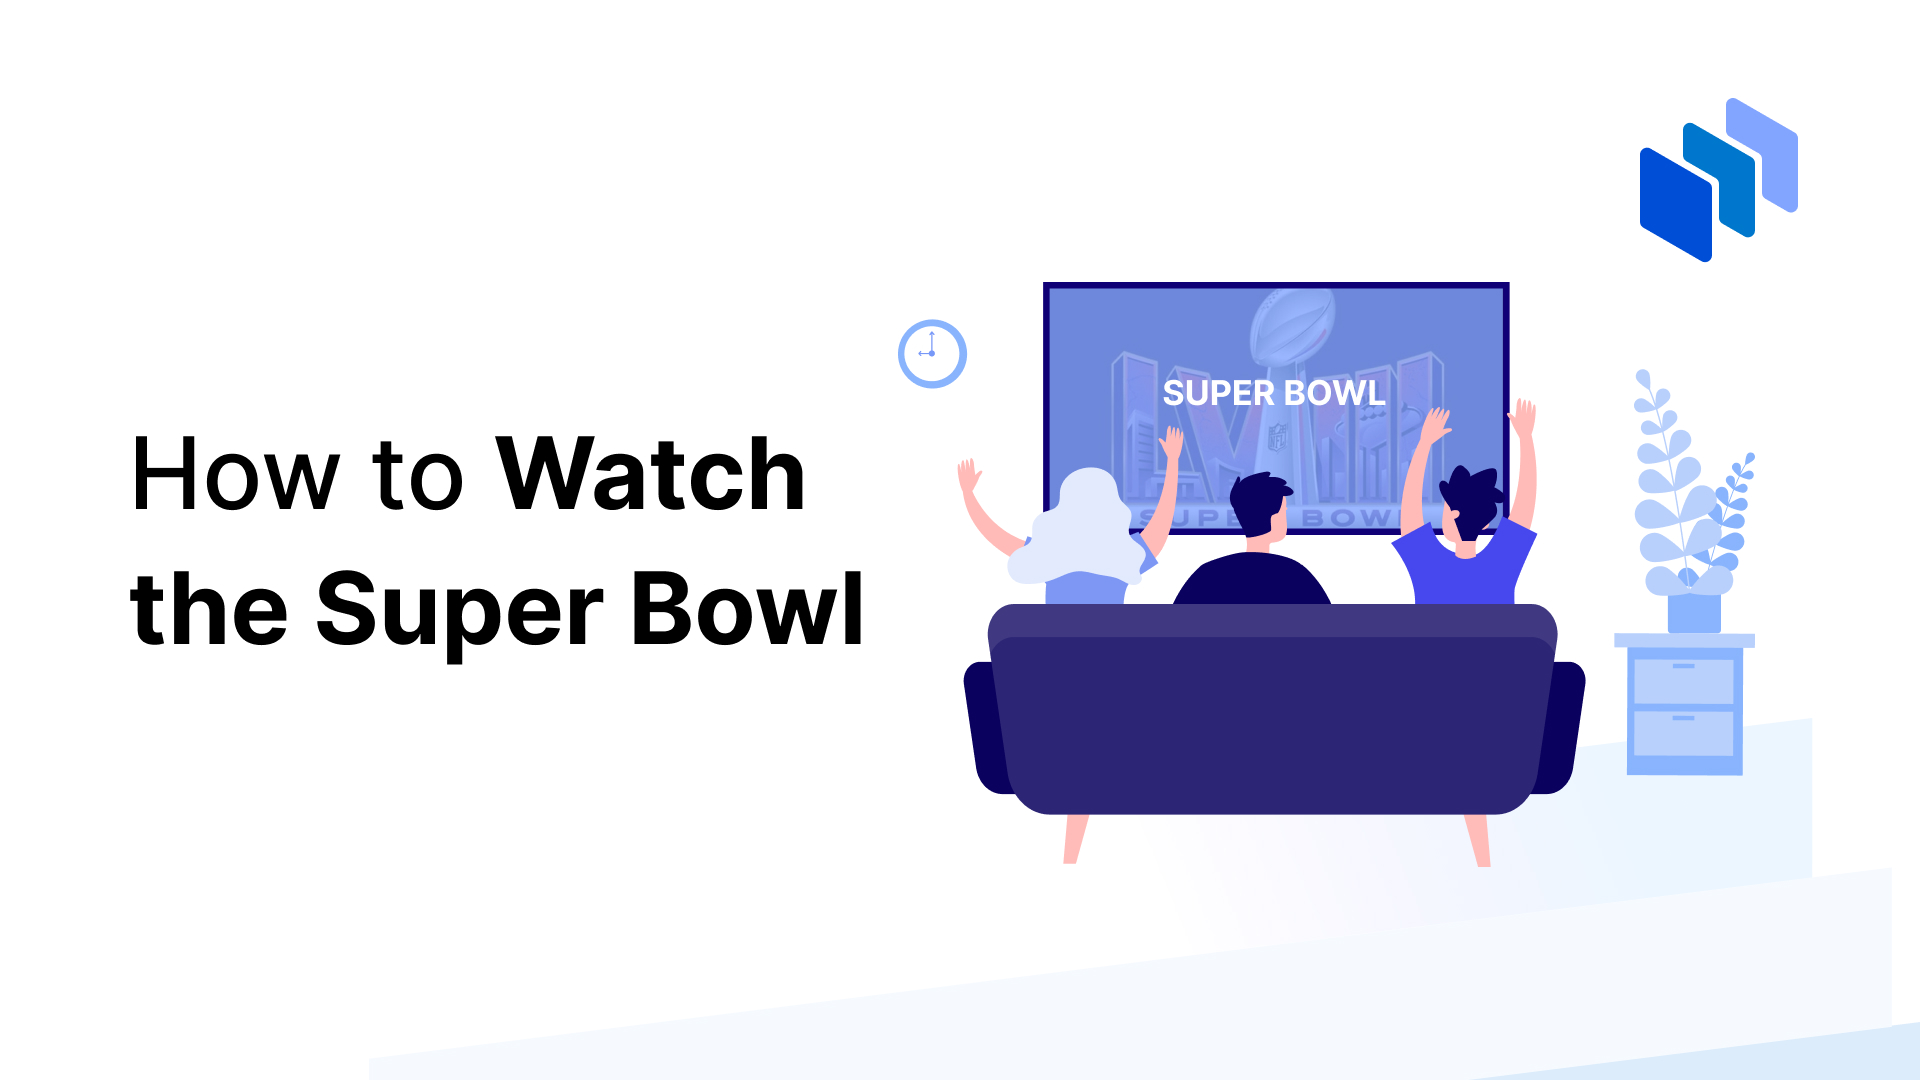 How to Watch the Super Bowl